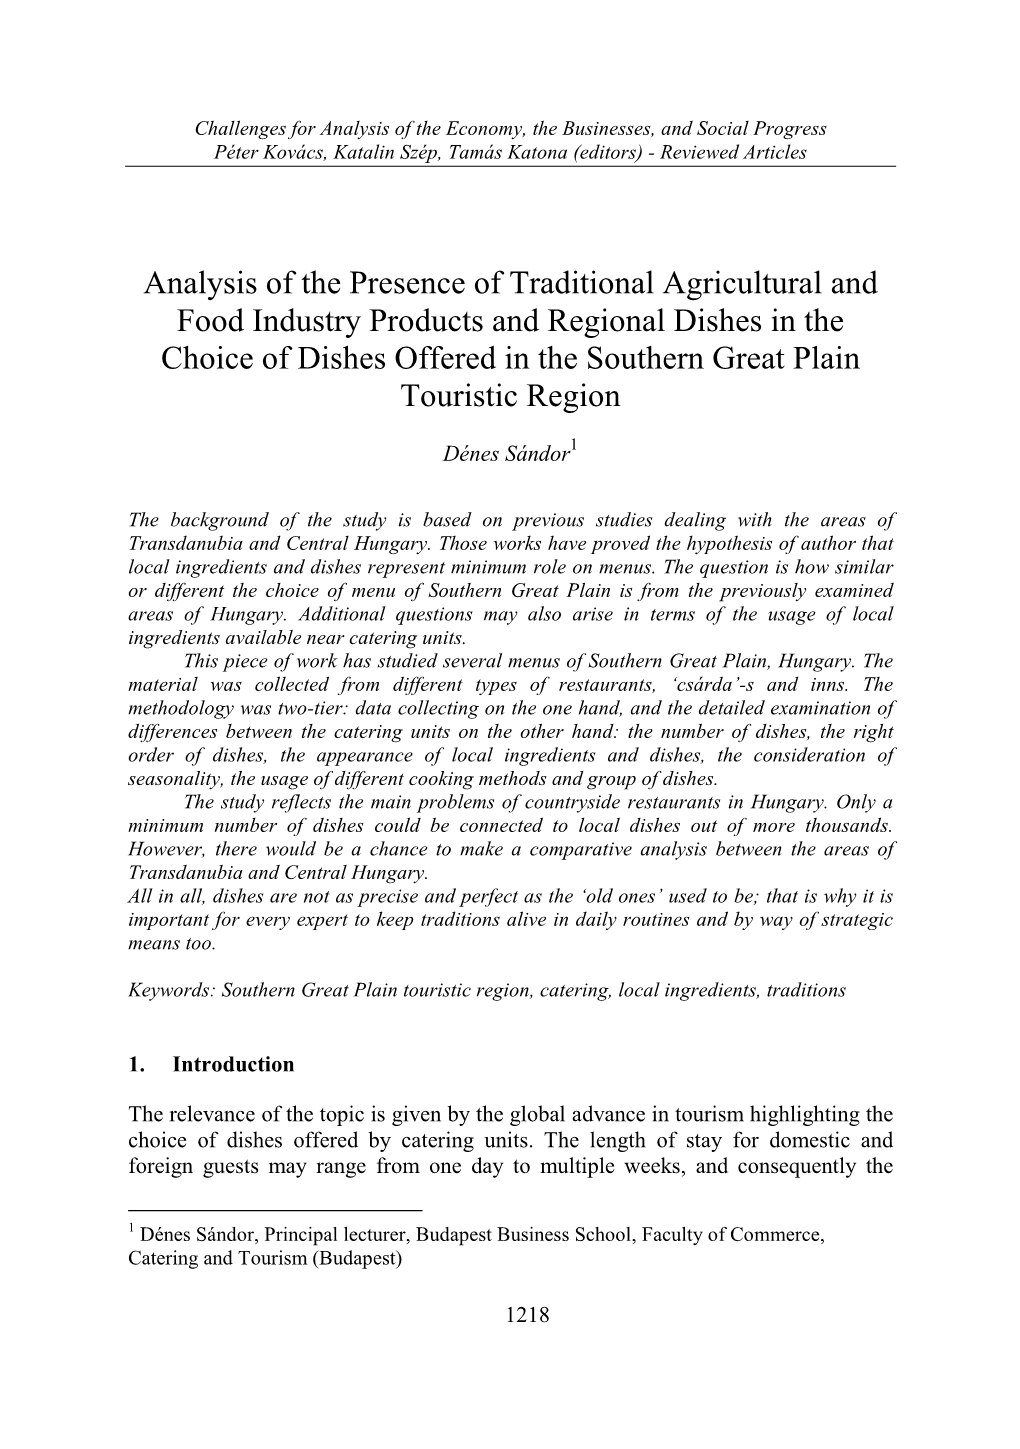 Analysis of the Presence of Traditional Agricultural and Food Industry Products and Regional Dishes in the Choice of Dishes Offe